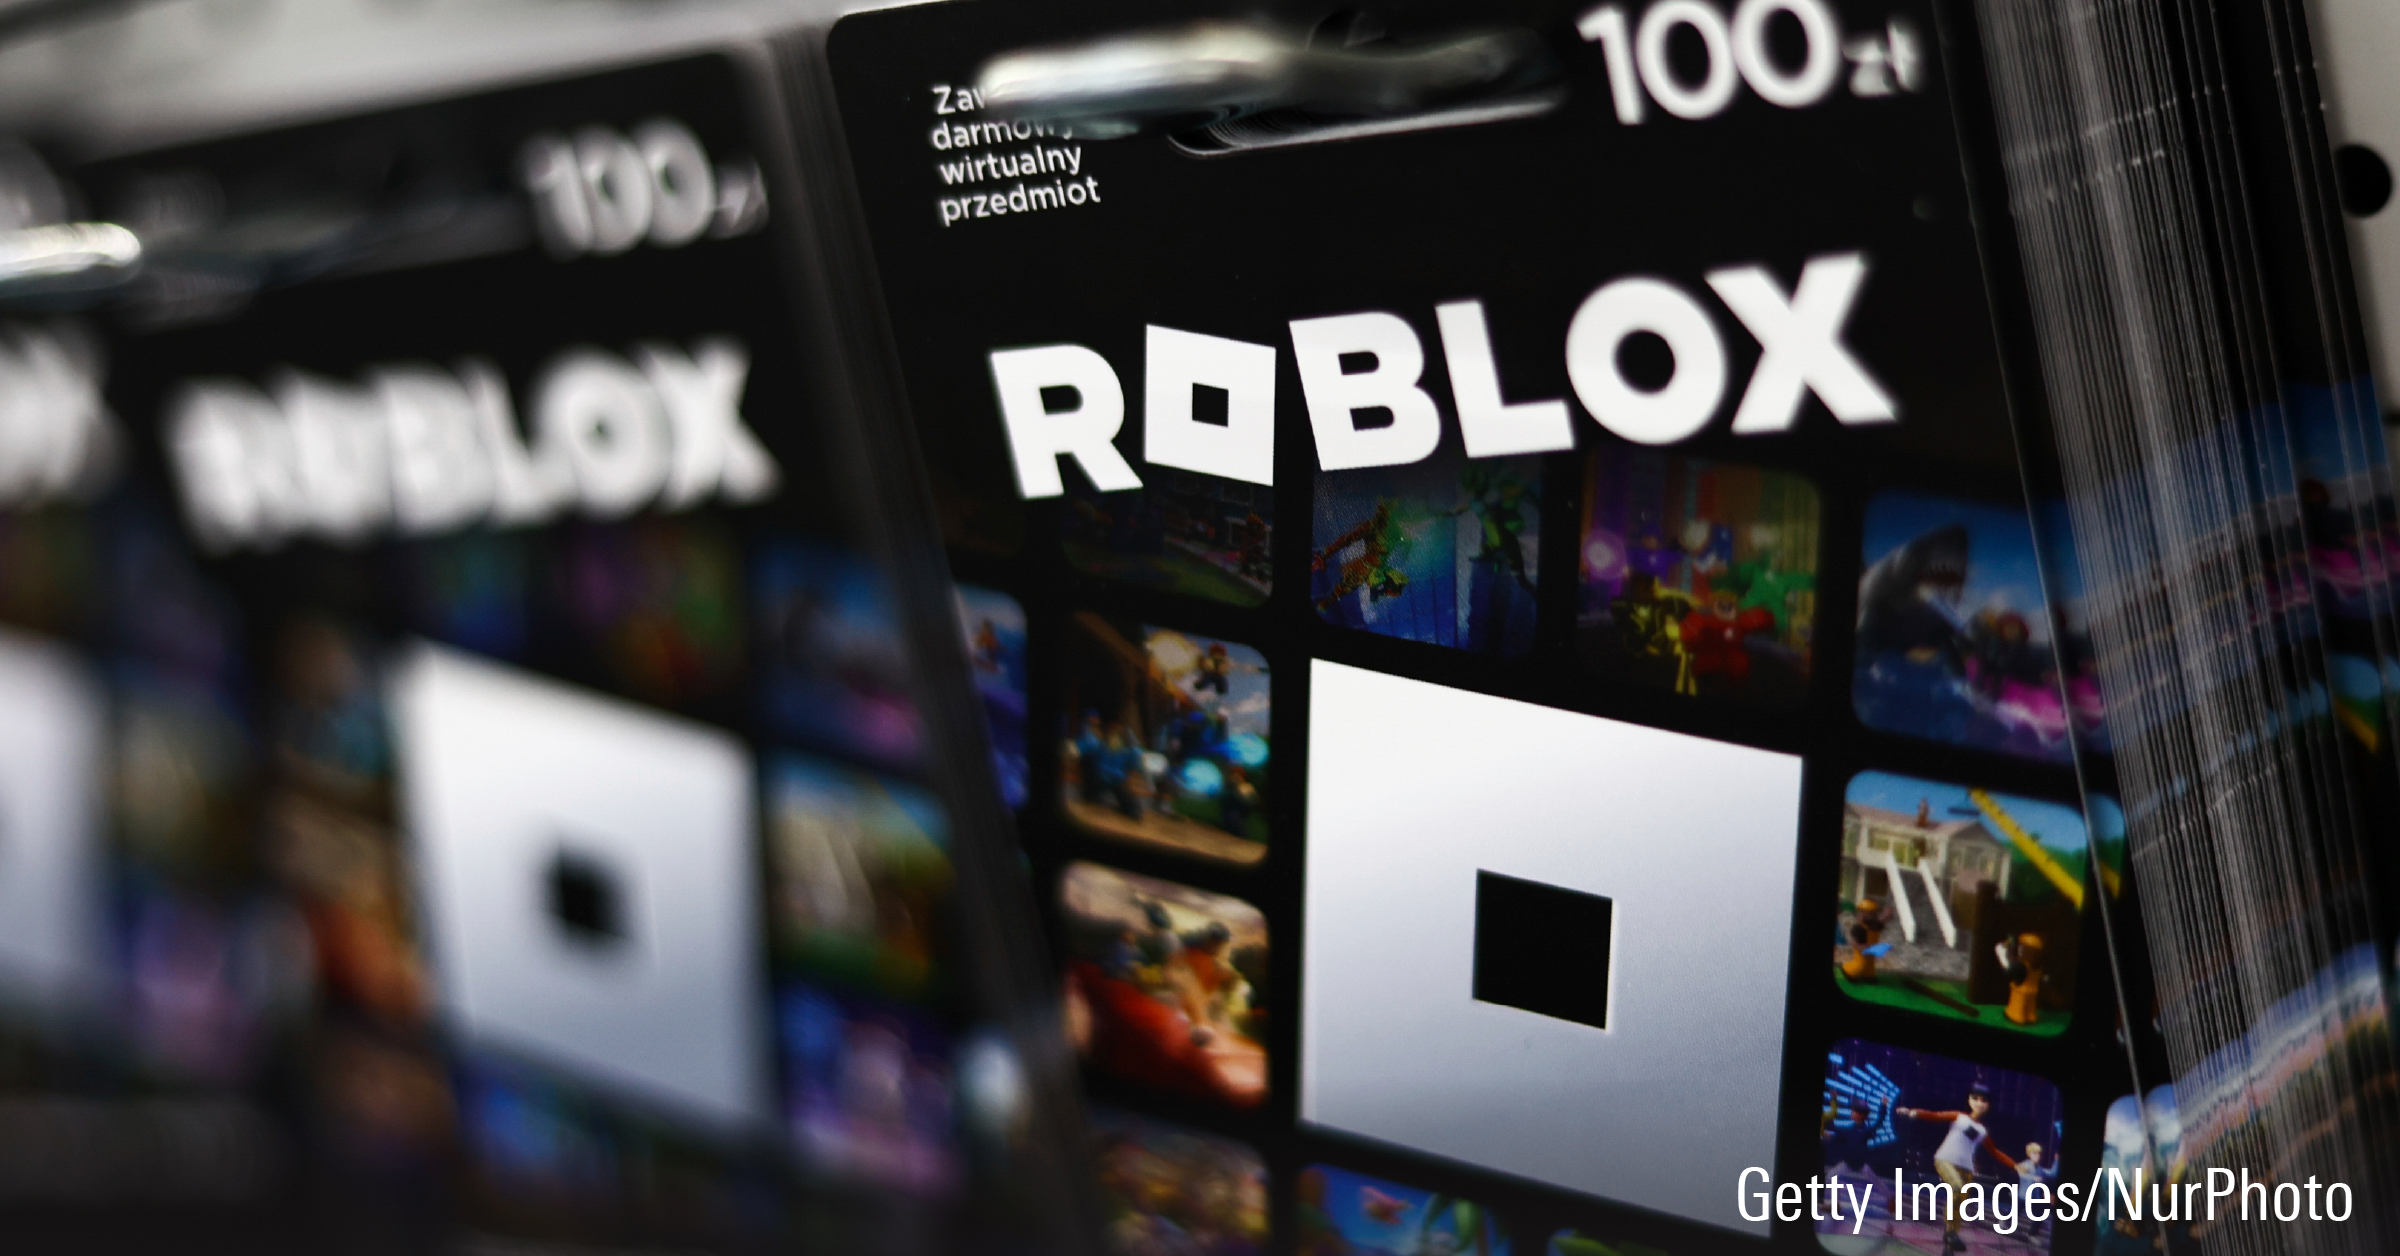 Roblox gift cards are seen at a store.